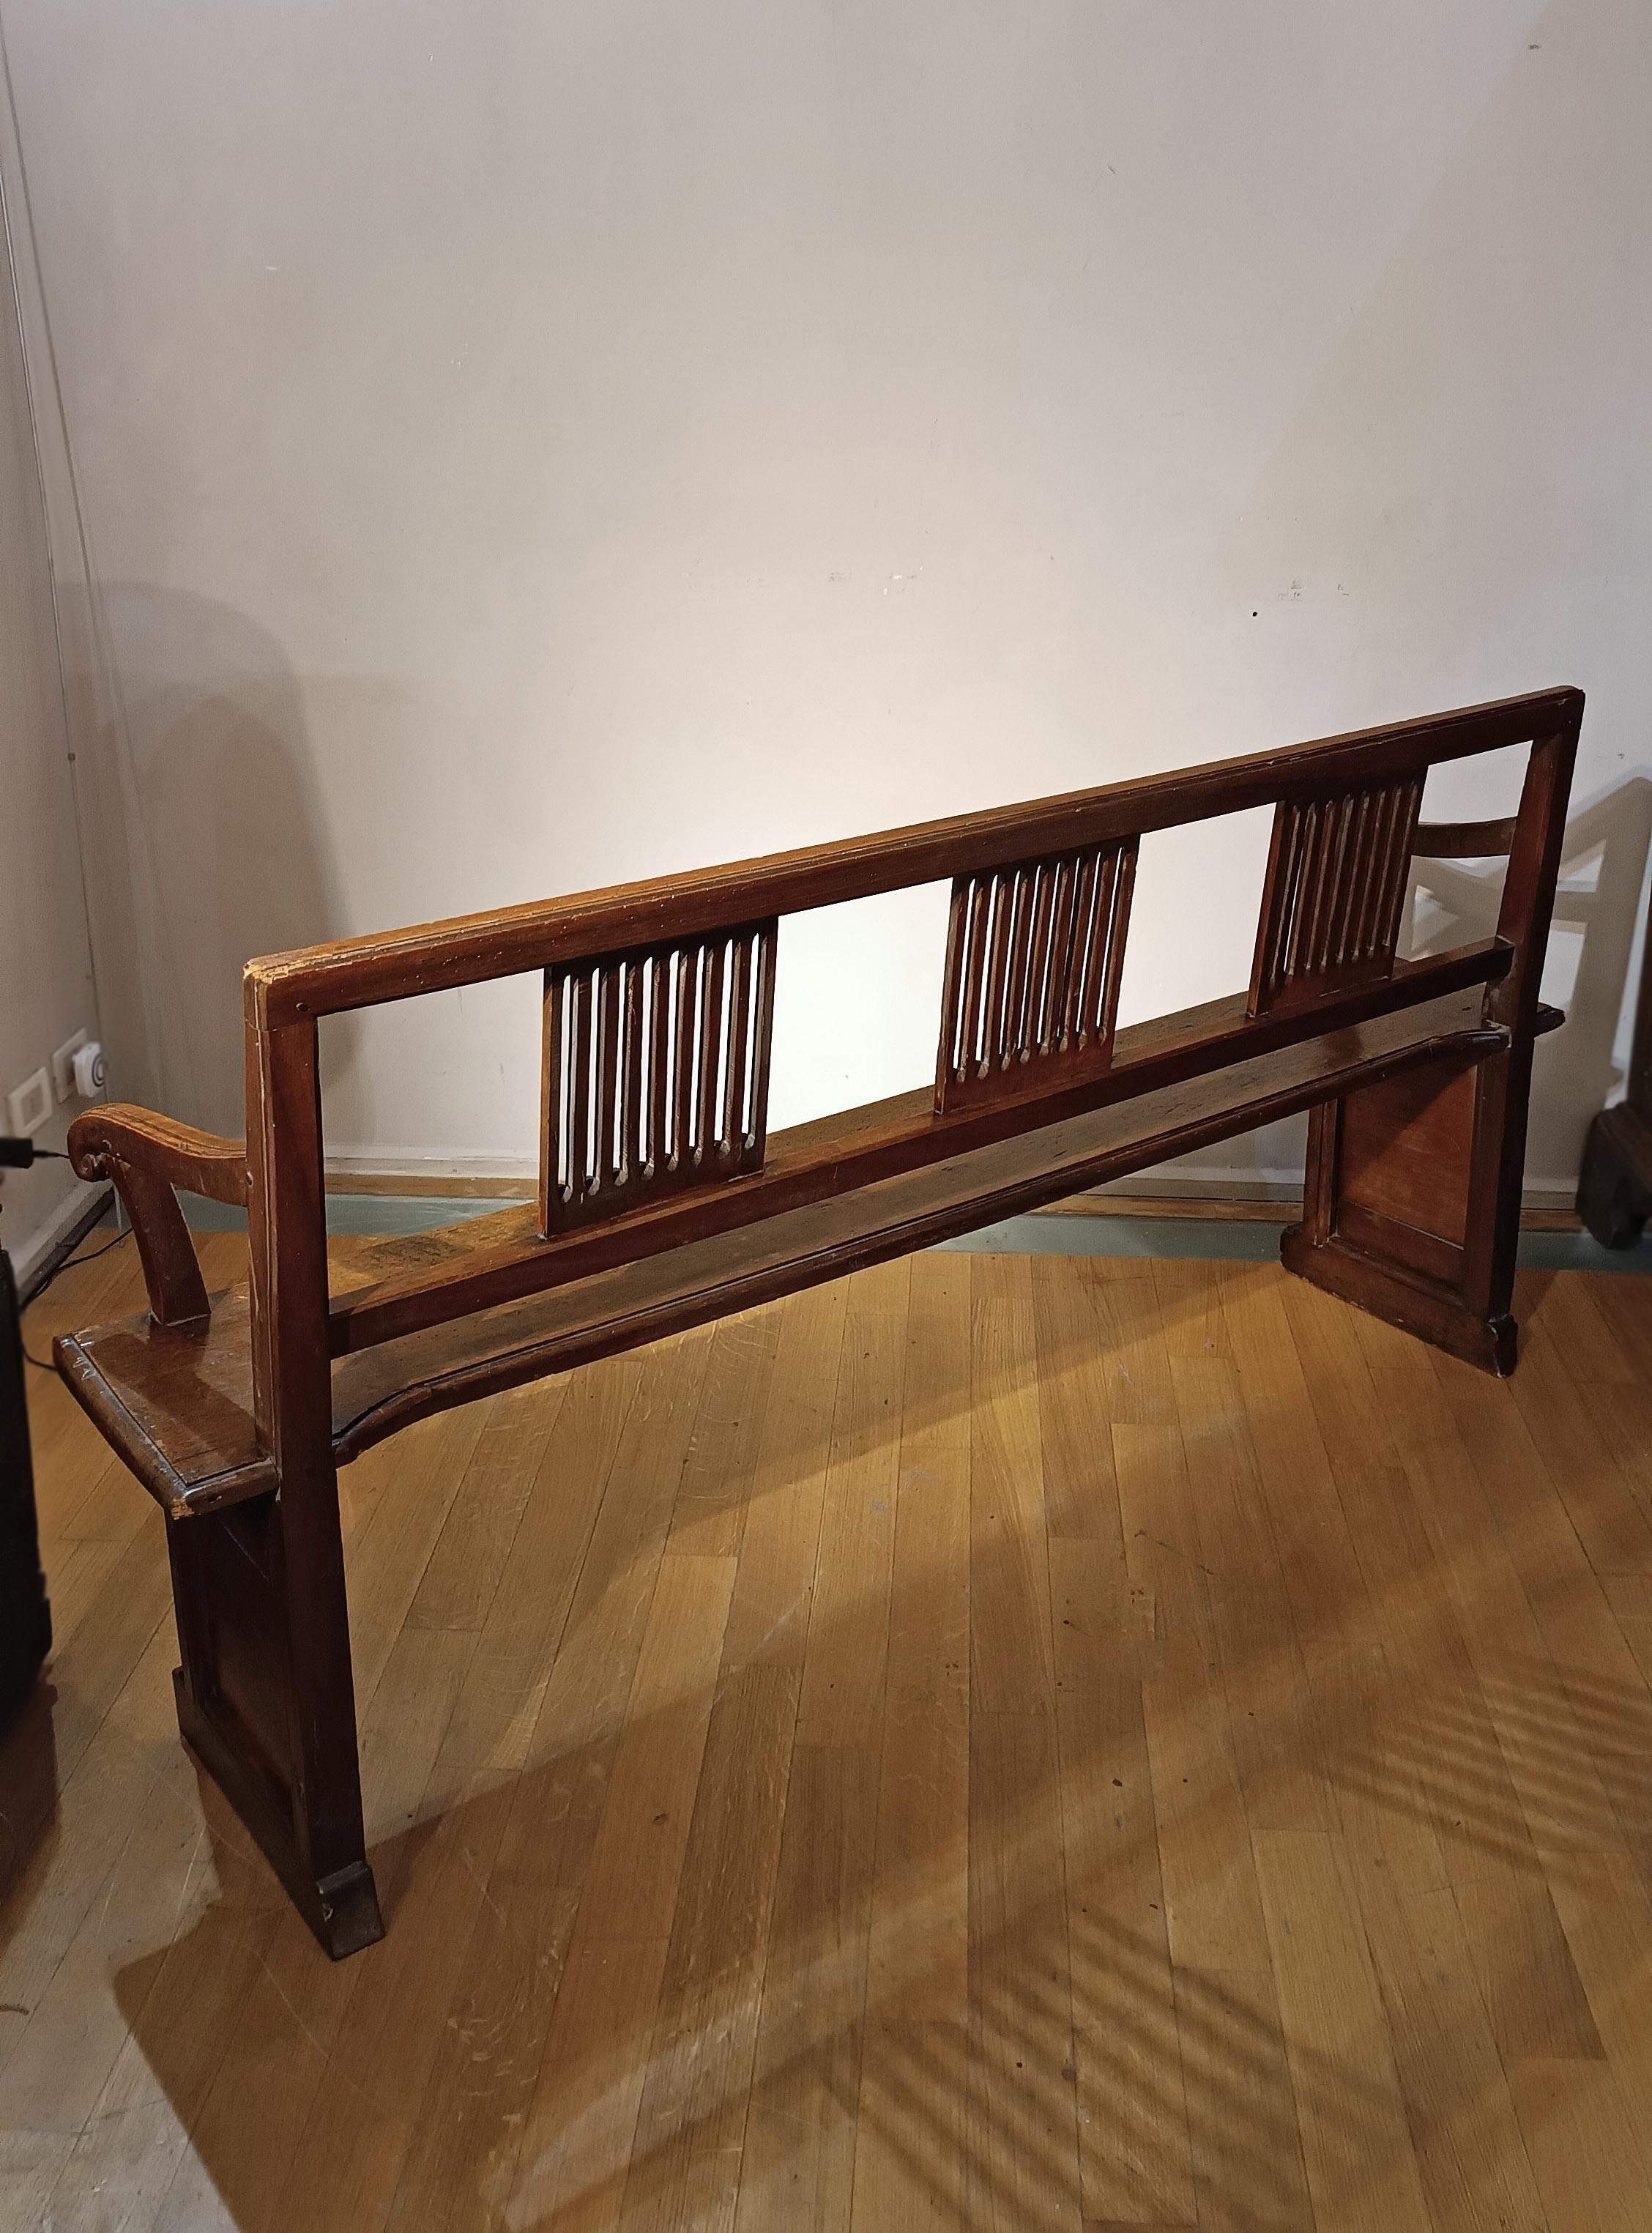 END OF THE 17th CENTURY WALNUT ENTRANCE BENCH  In Good Condition For Sale In Firenze, FI